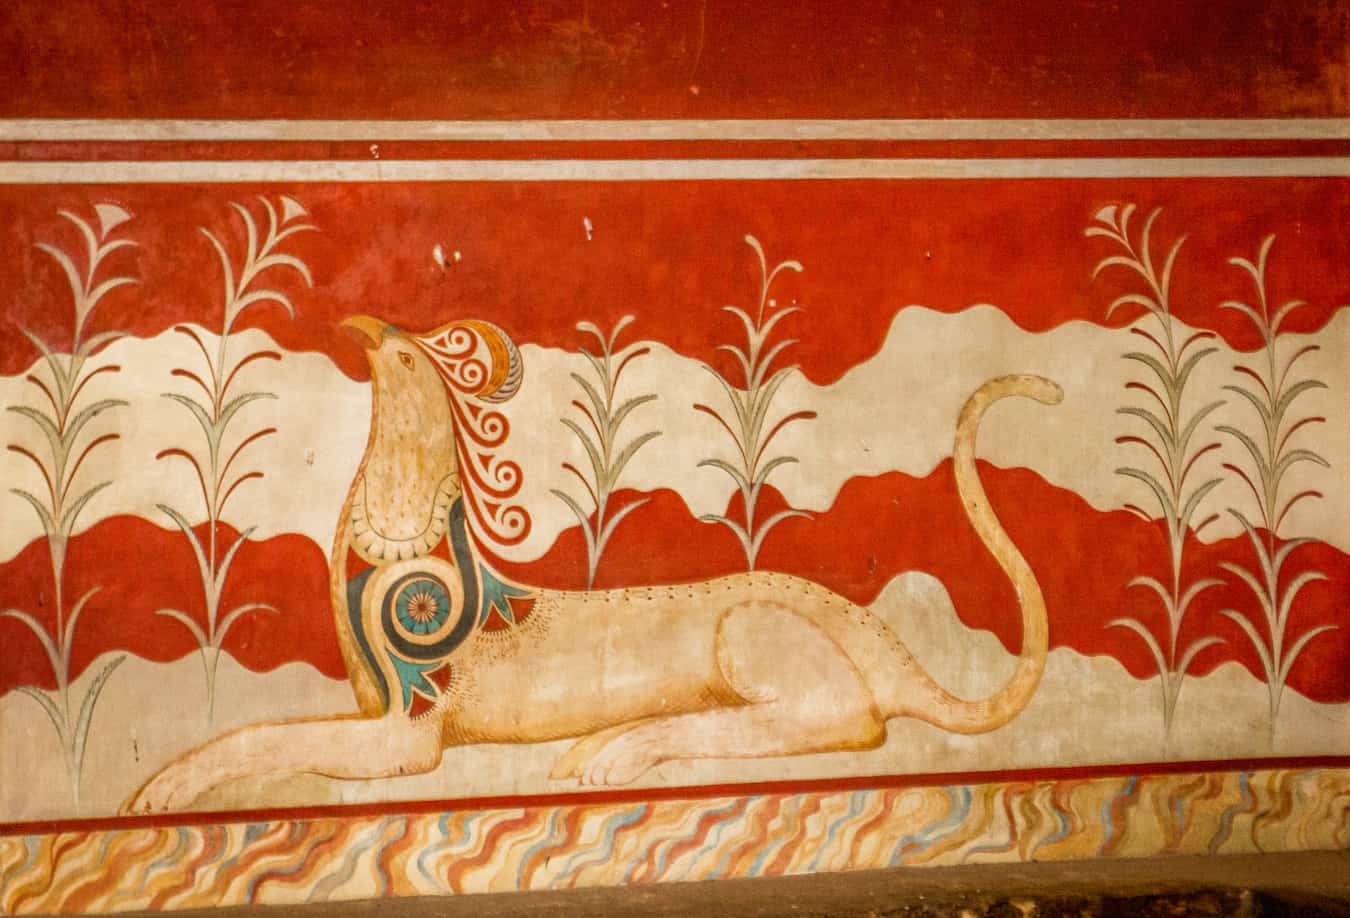 Mural at the Minoan Palace Knossos in Crete, Greece